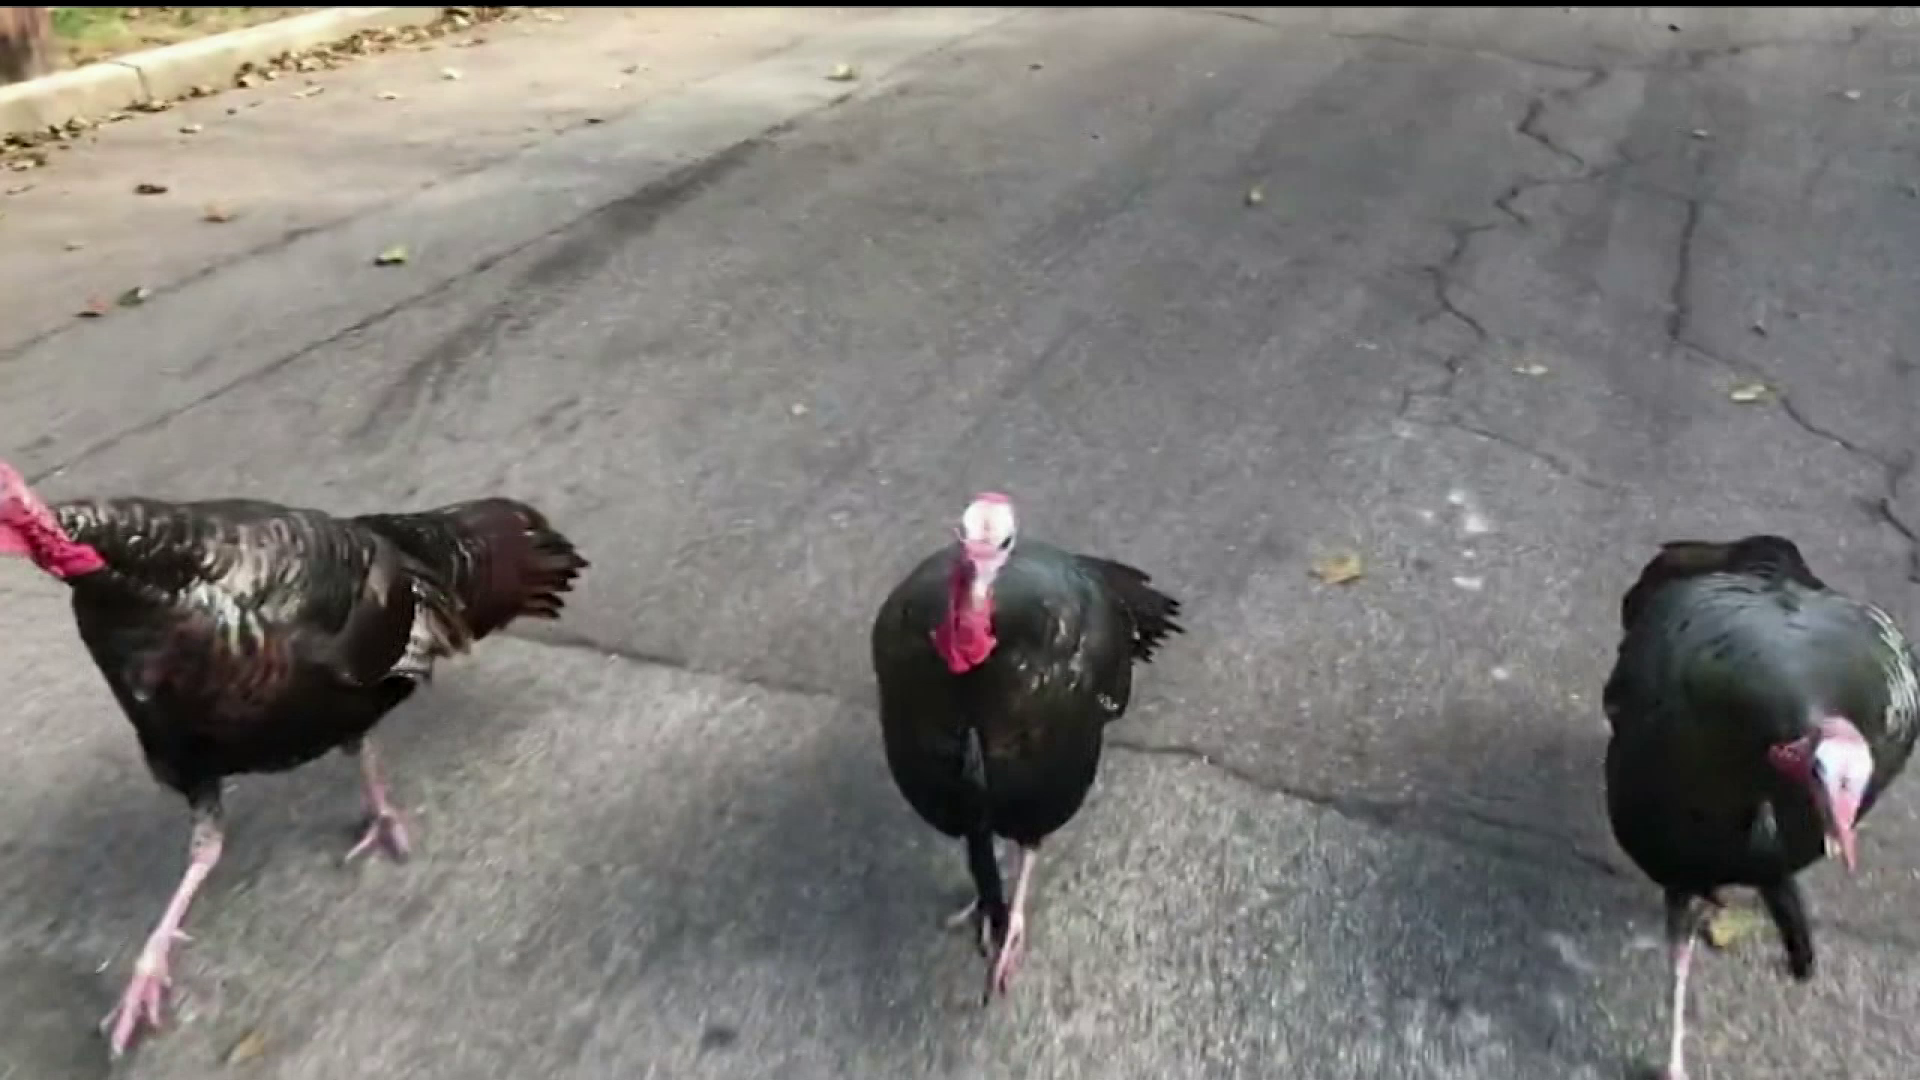 Aggressive turkeys causing problems in New England town